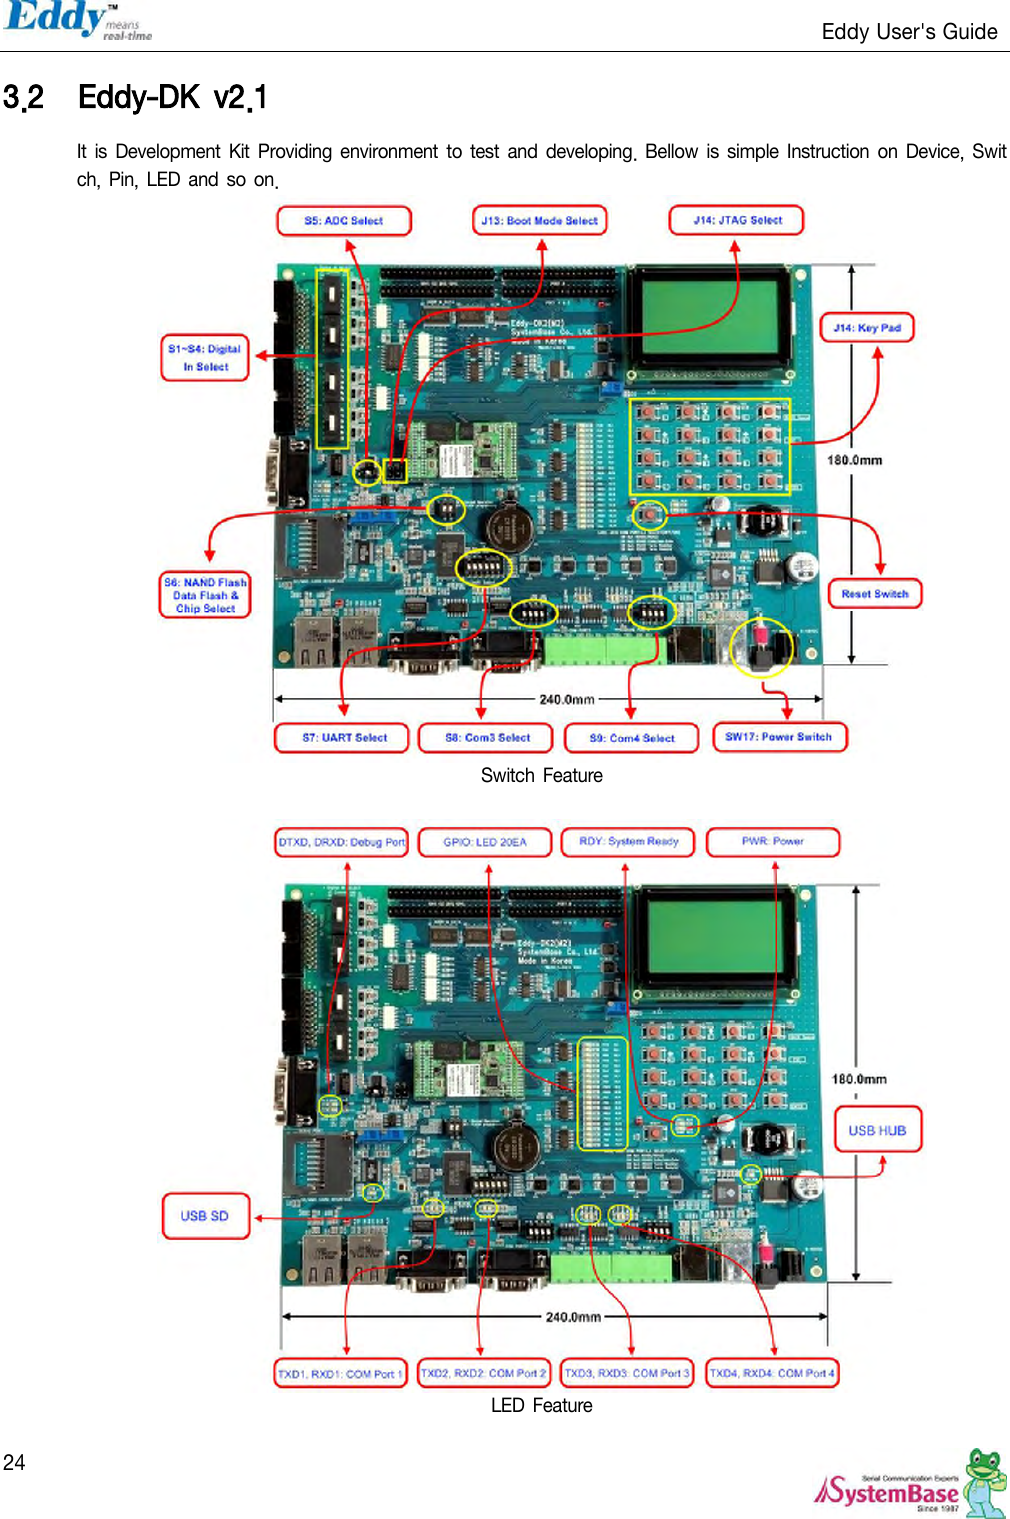                                                                   Eddy User&apos;s Guide   24 3.2 Eddy-DK  v2.1   It is Development Kit Providing environment to test  and  developing. Bellow is simple Instruction on  Device,  Switch, Pin, LED and so  on.   Switch  Feature   LED  Feature 